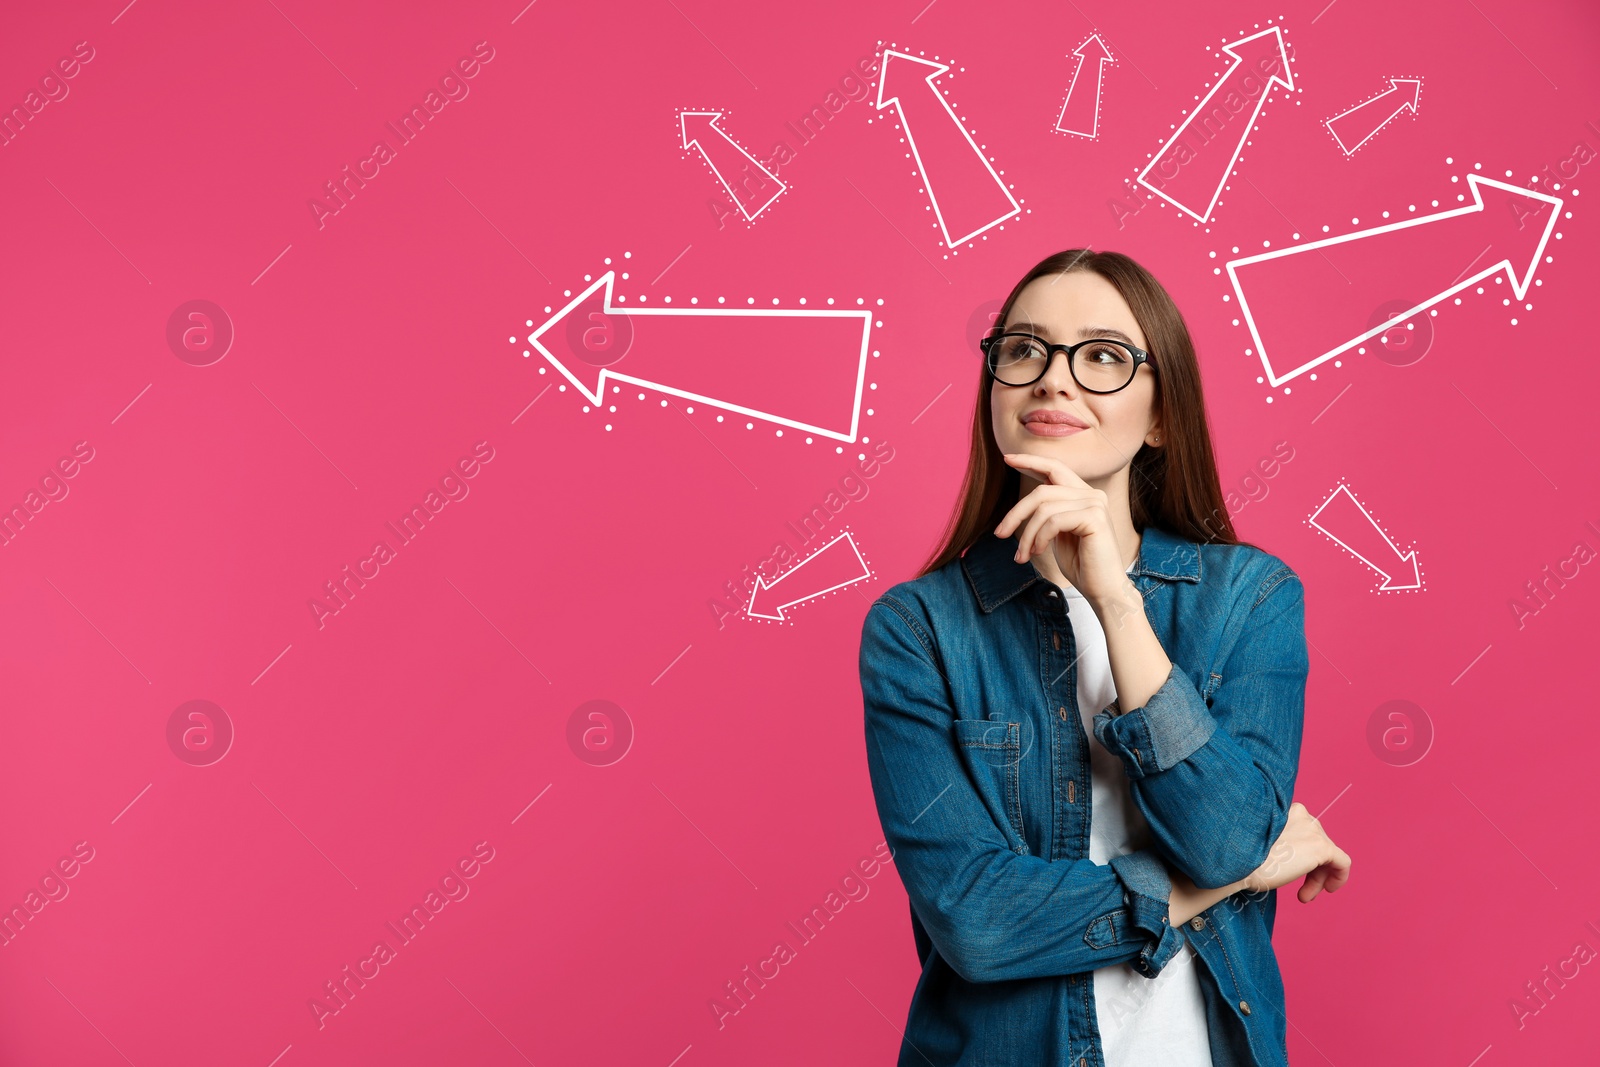 Image of Pensive woman standing near pink wall with arrows, space for text  